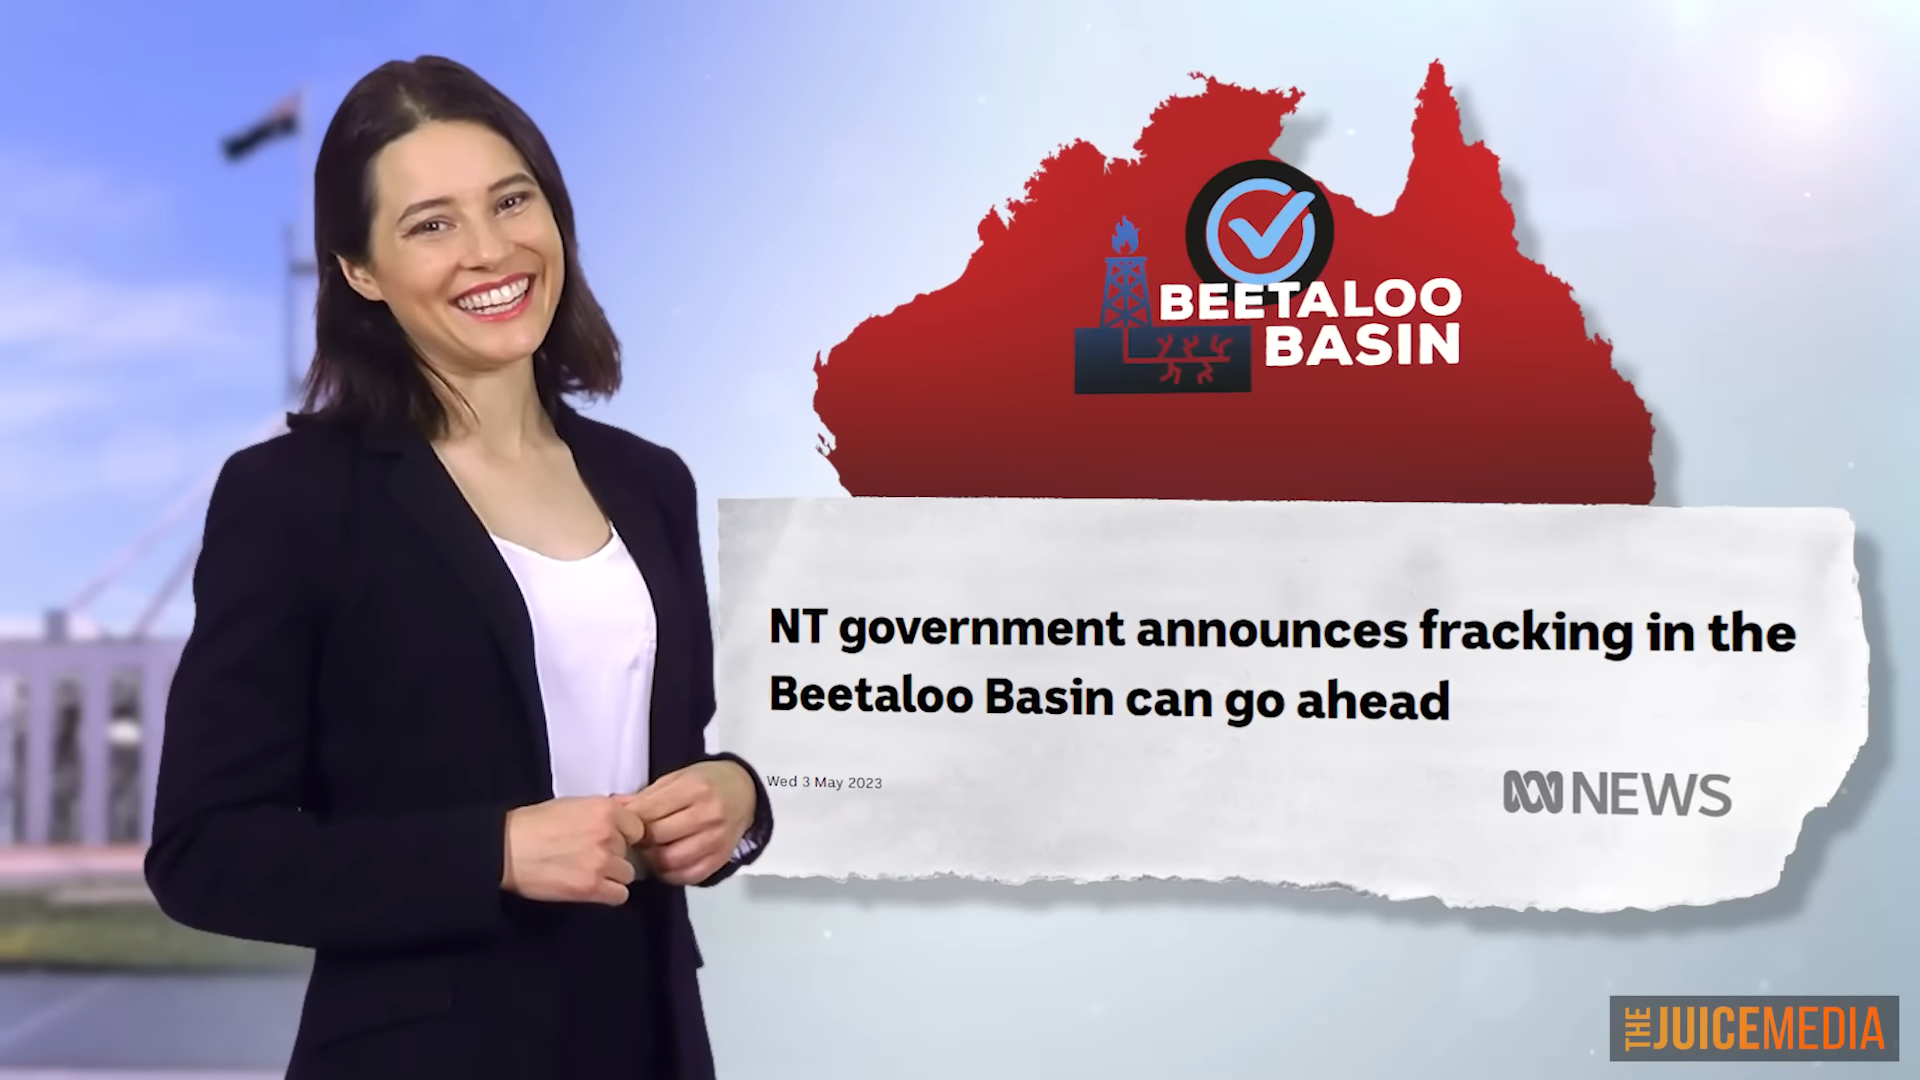 Screenshot from the “Honest Government Ad: COP31 🇦🇺 & the Pacific”, by The Juice Media, showing the approval of natural gas fracking in the Beetaloo Basin in Australia’s Northern Territory. Photo: The Juice Media